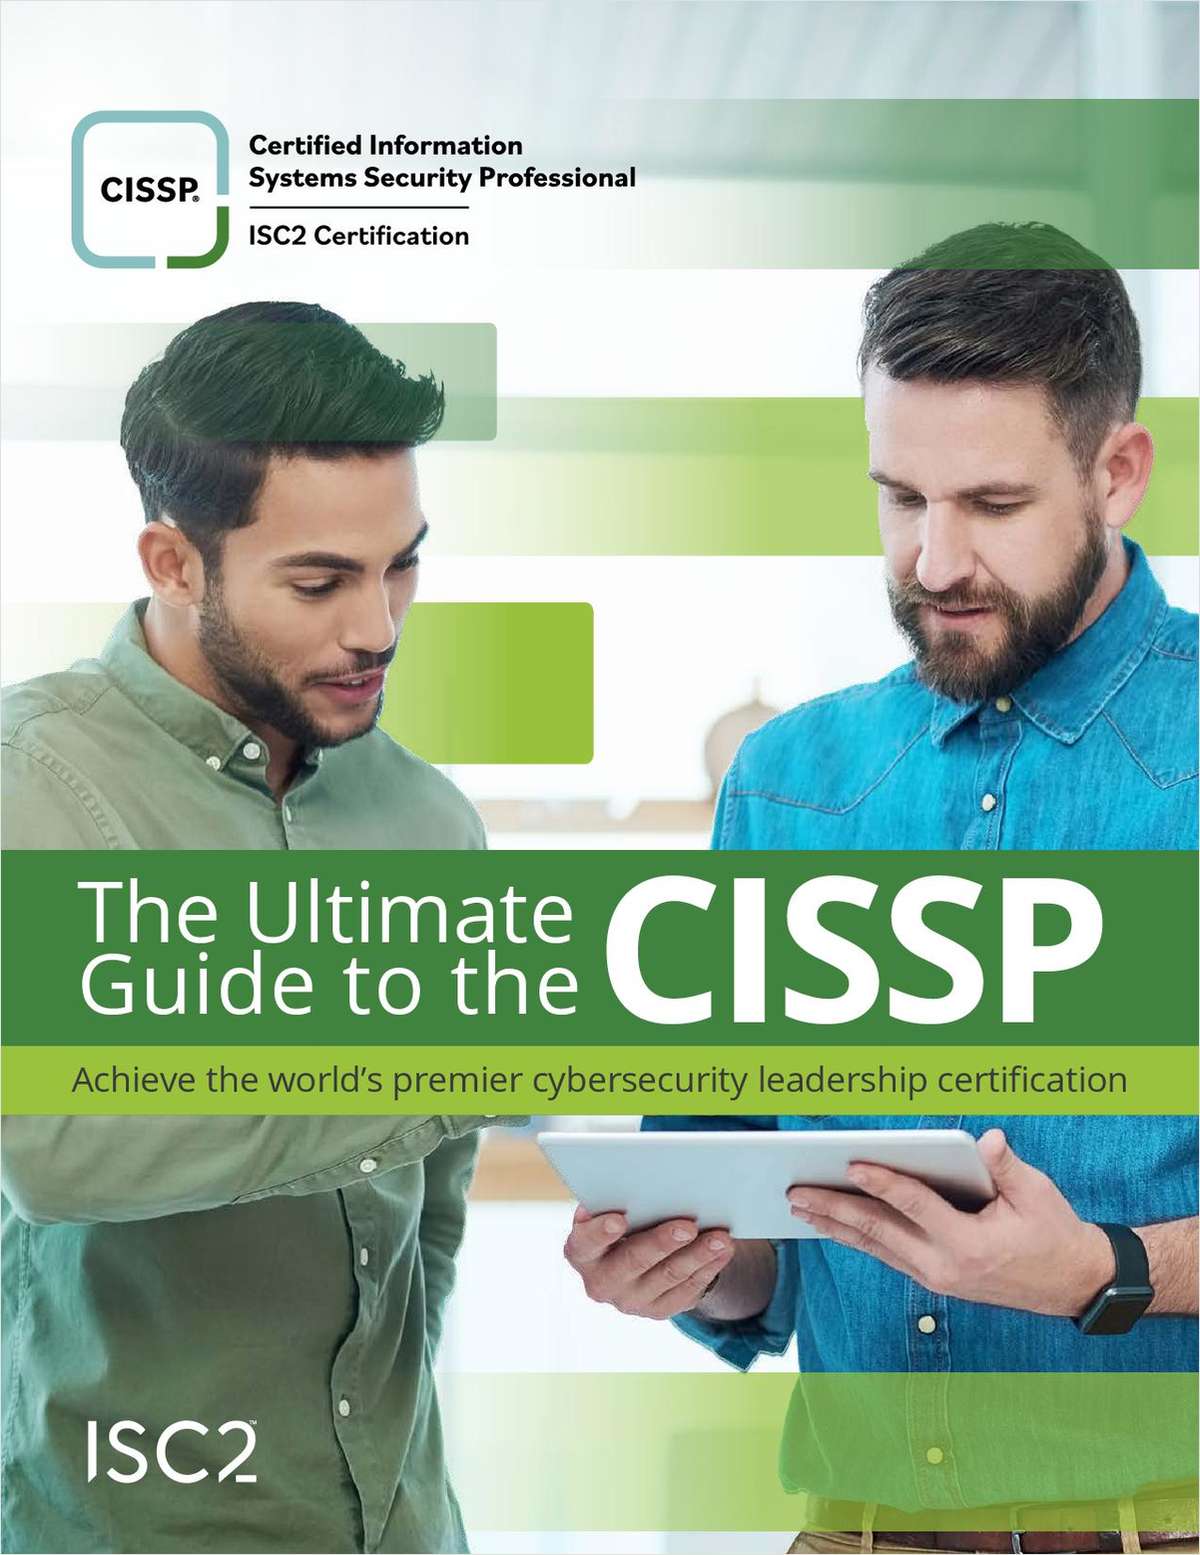 The Ultimate Guide to the CISSP